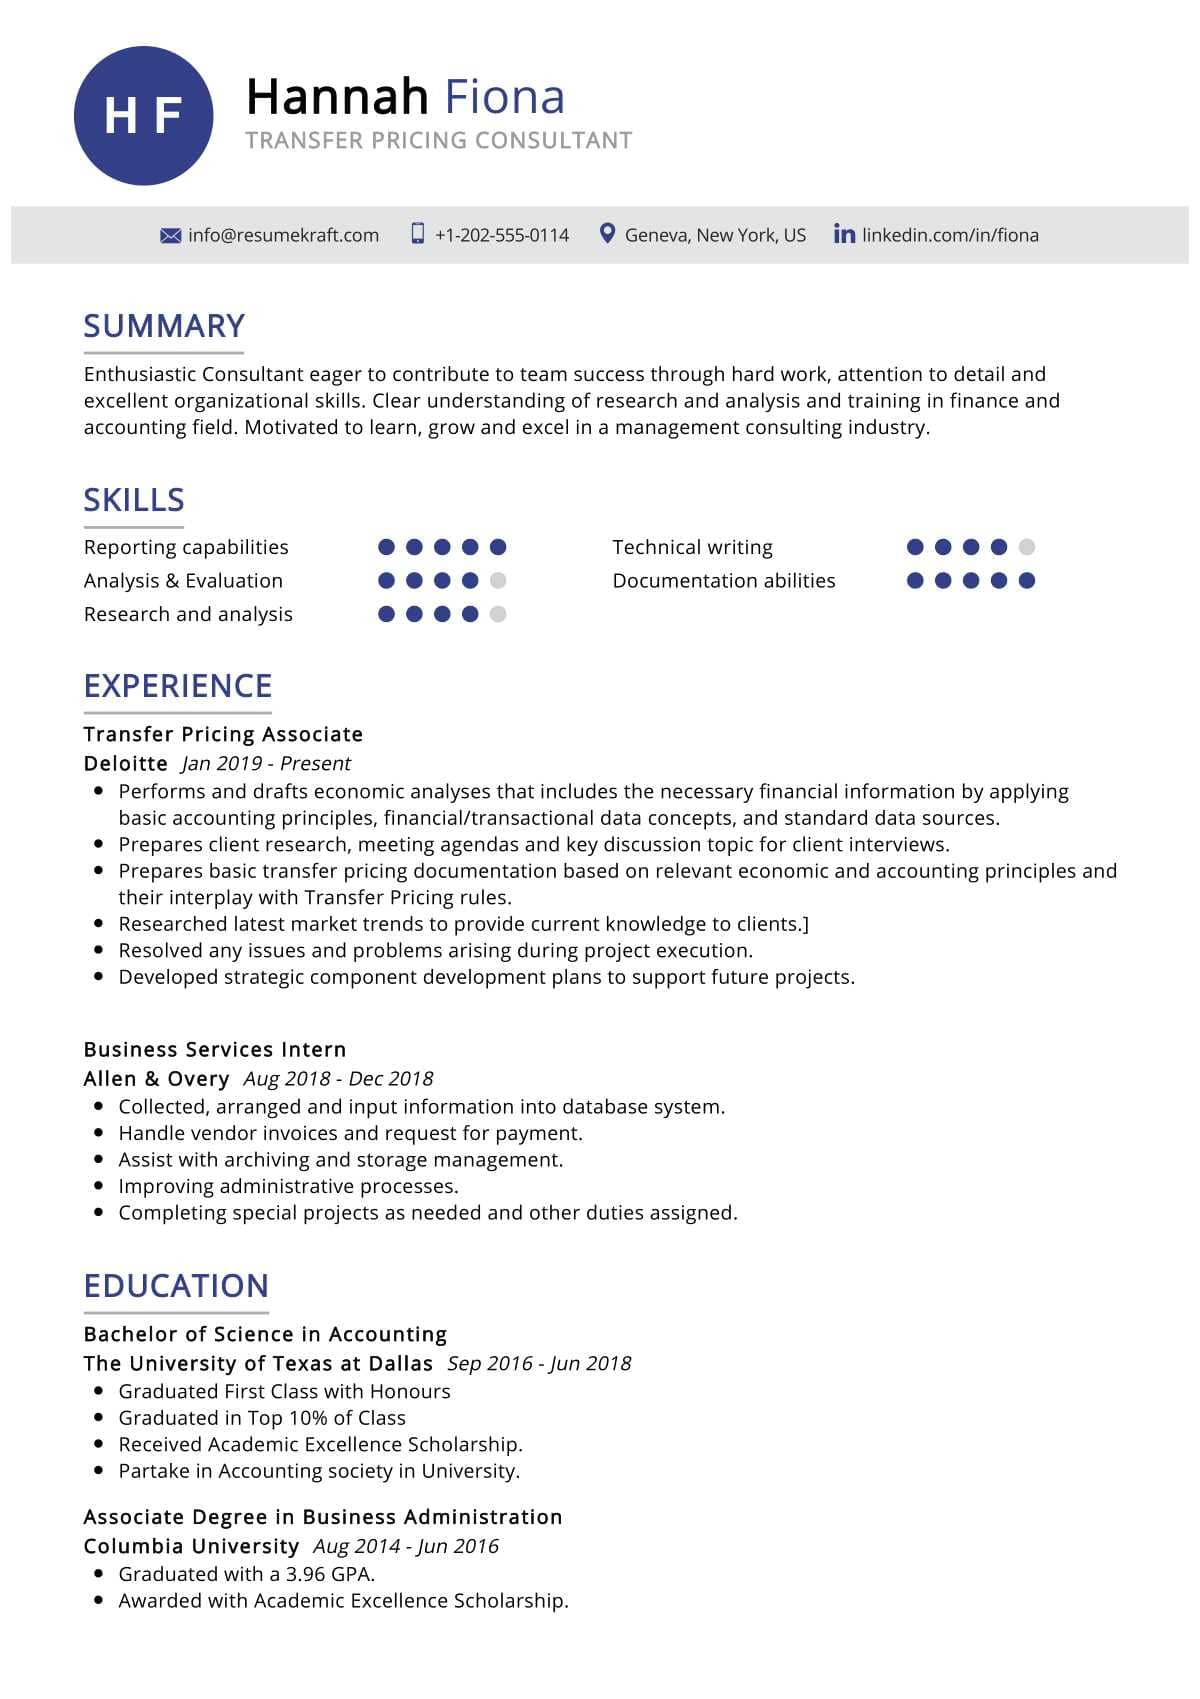 Sample Resume with Big 4 Tax Internexperience Transfer Pricing Consultant Resume Sample 2022 Writing Tips …